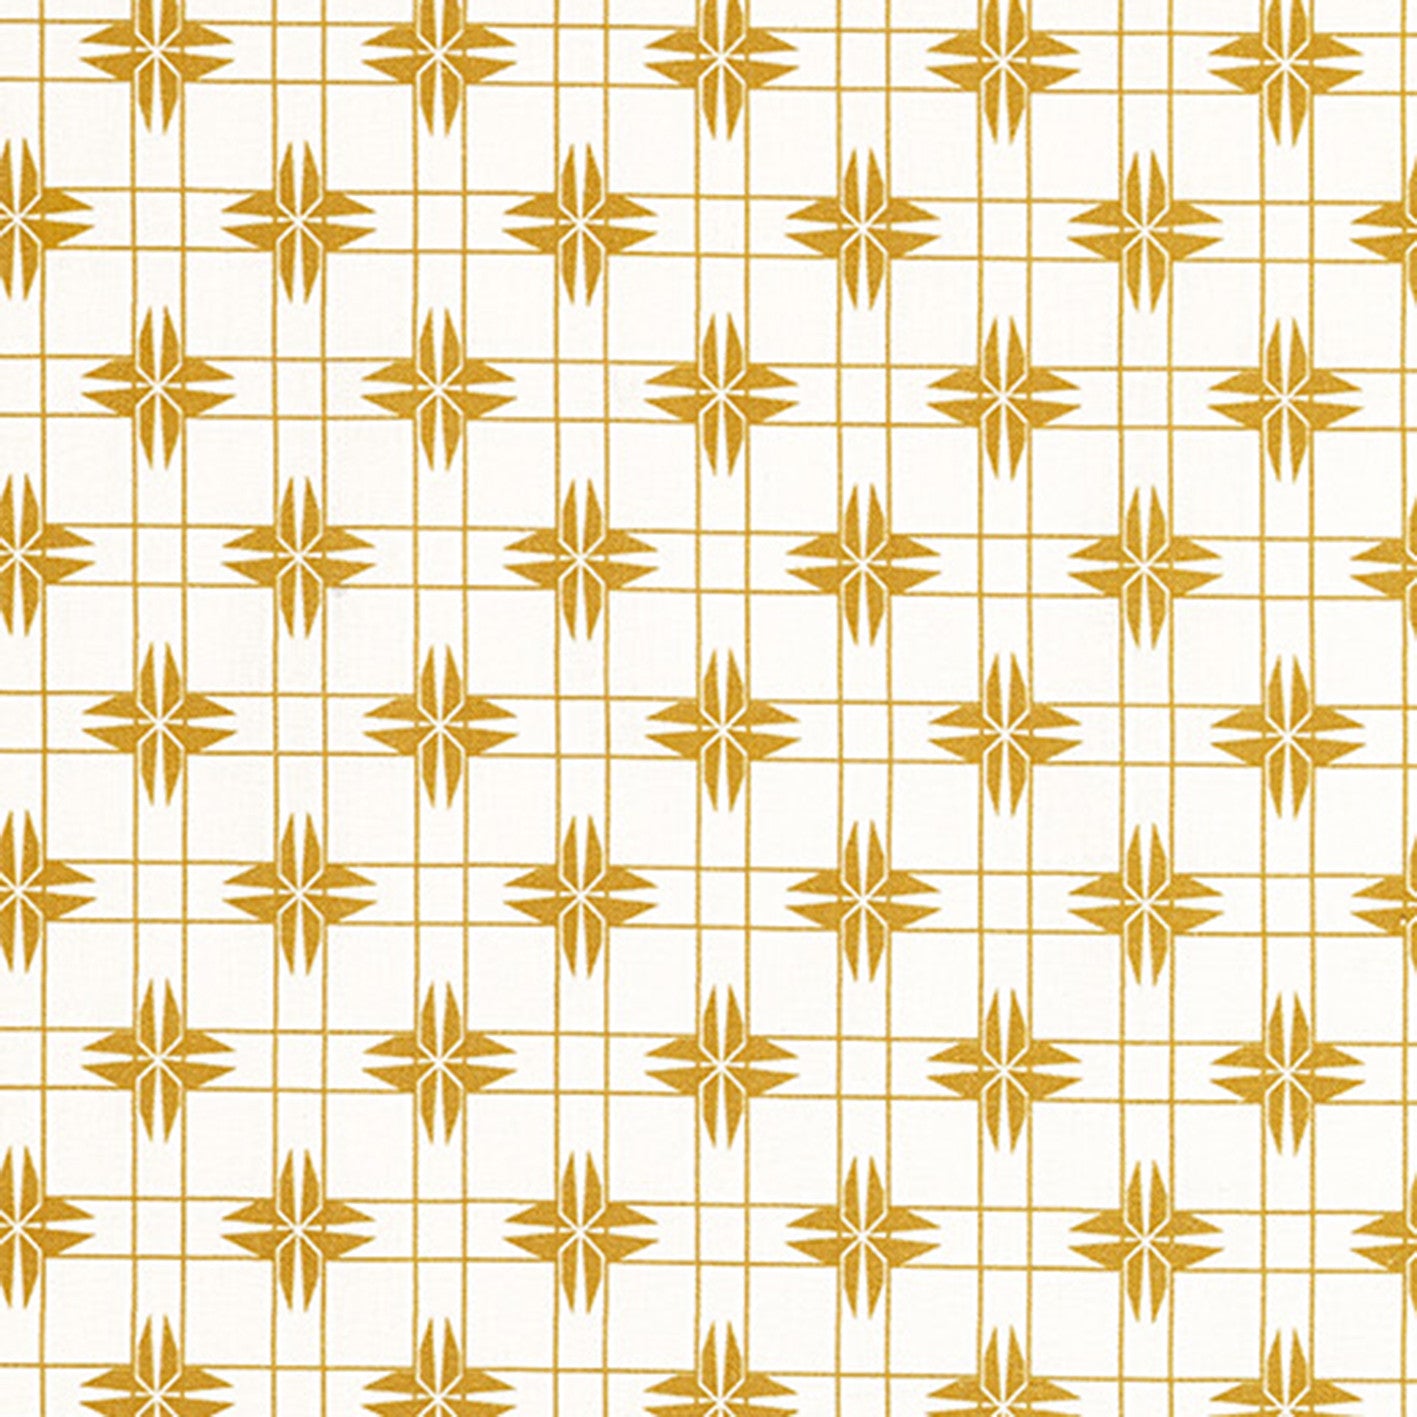 Pueblo Geometric Pattern Cotton Linen Home Decor Fabric by the meter or the yard - Gold- curtains, blinds, upholstery ships from Canada